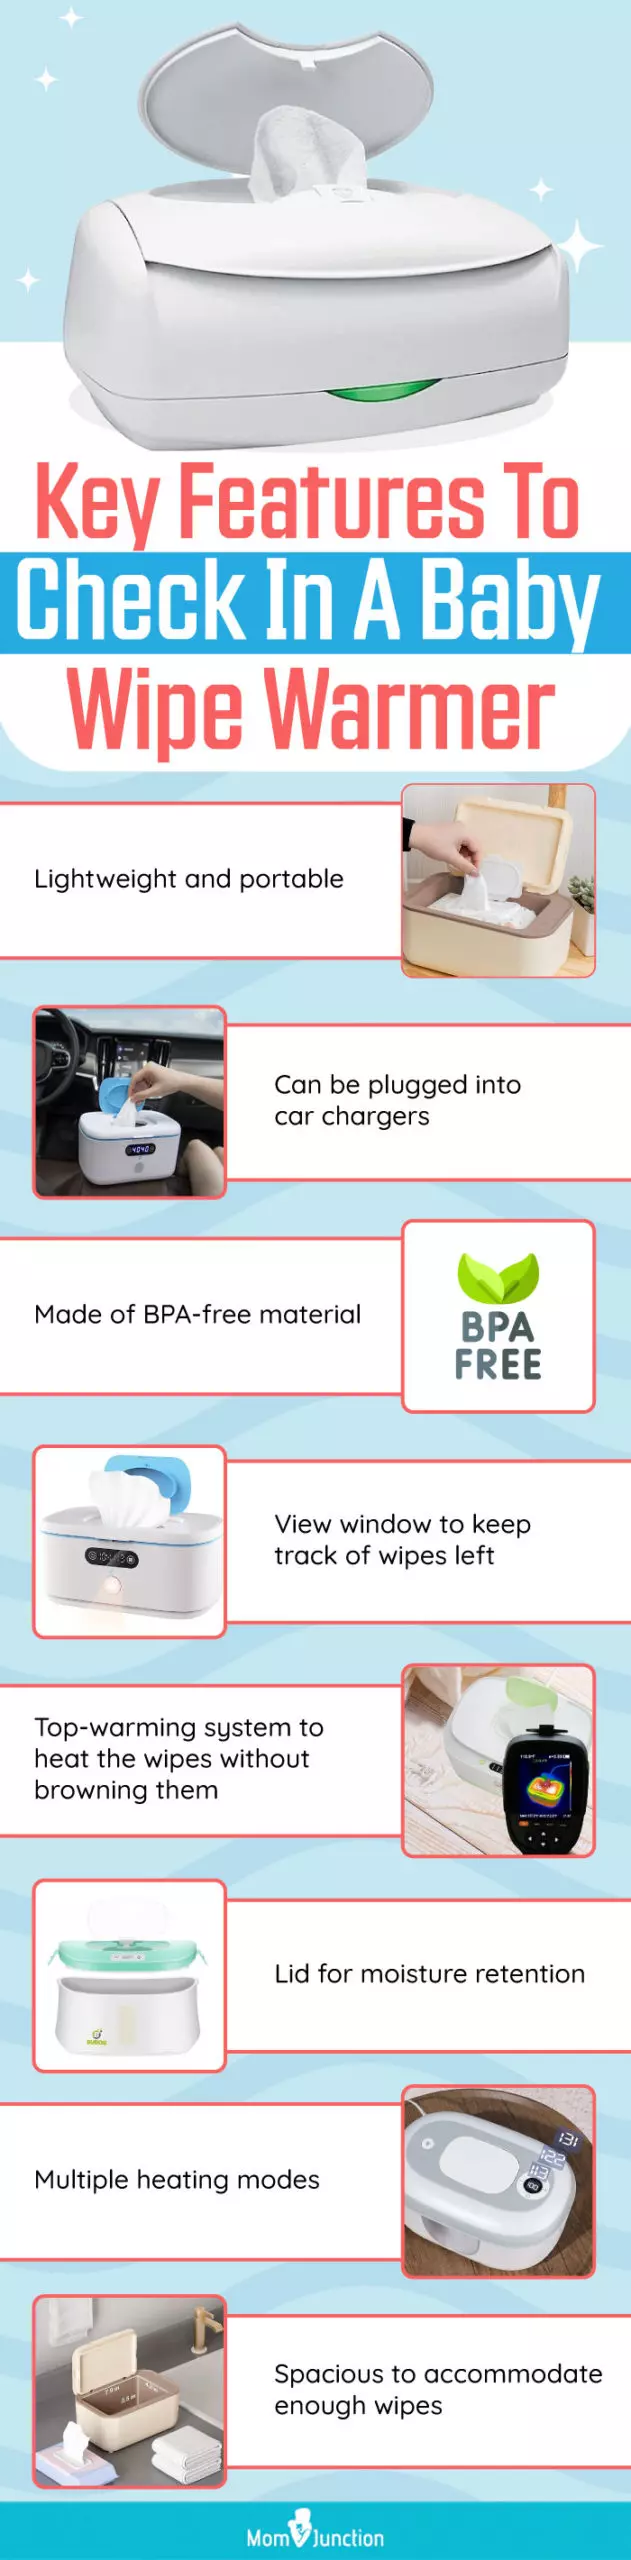 Key Features To Check In A Baby Wipe Warmer (infographic)